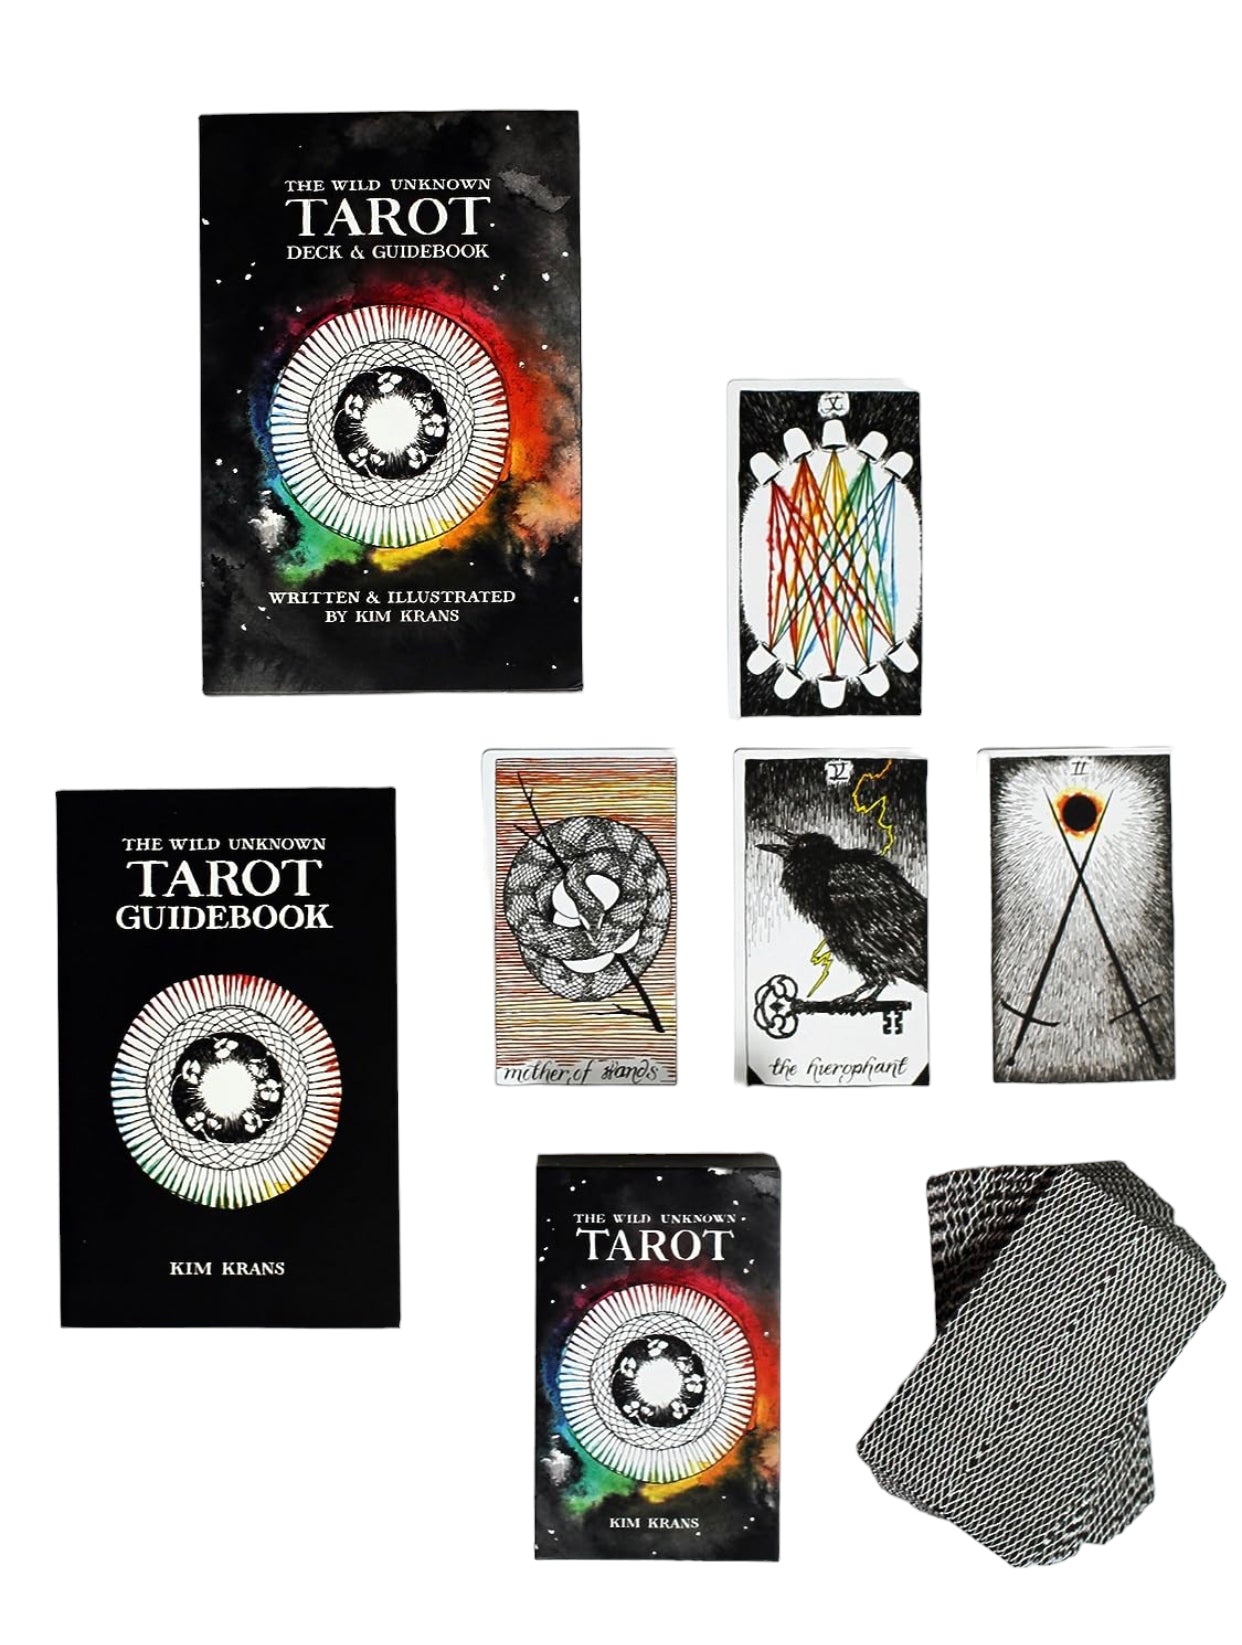 Kim Krans: The Wild Unknown Tarot Deck and Guidebook